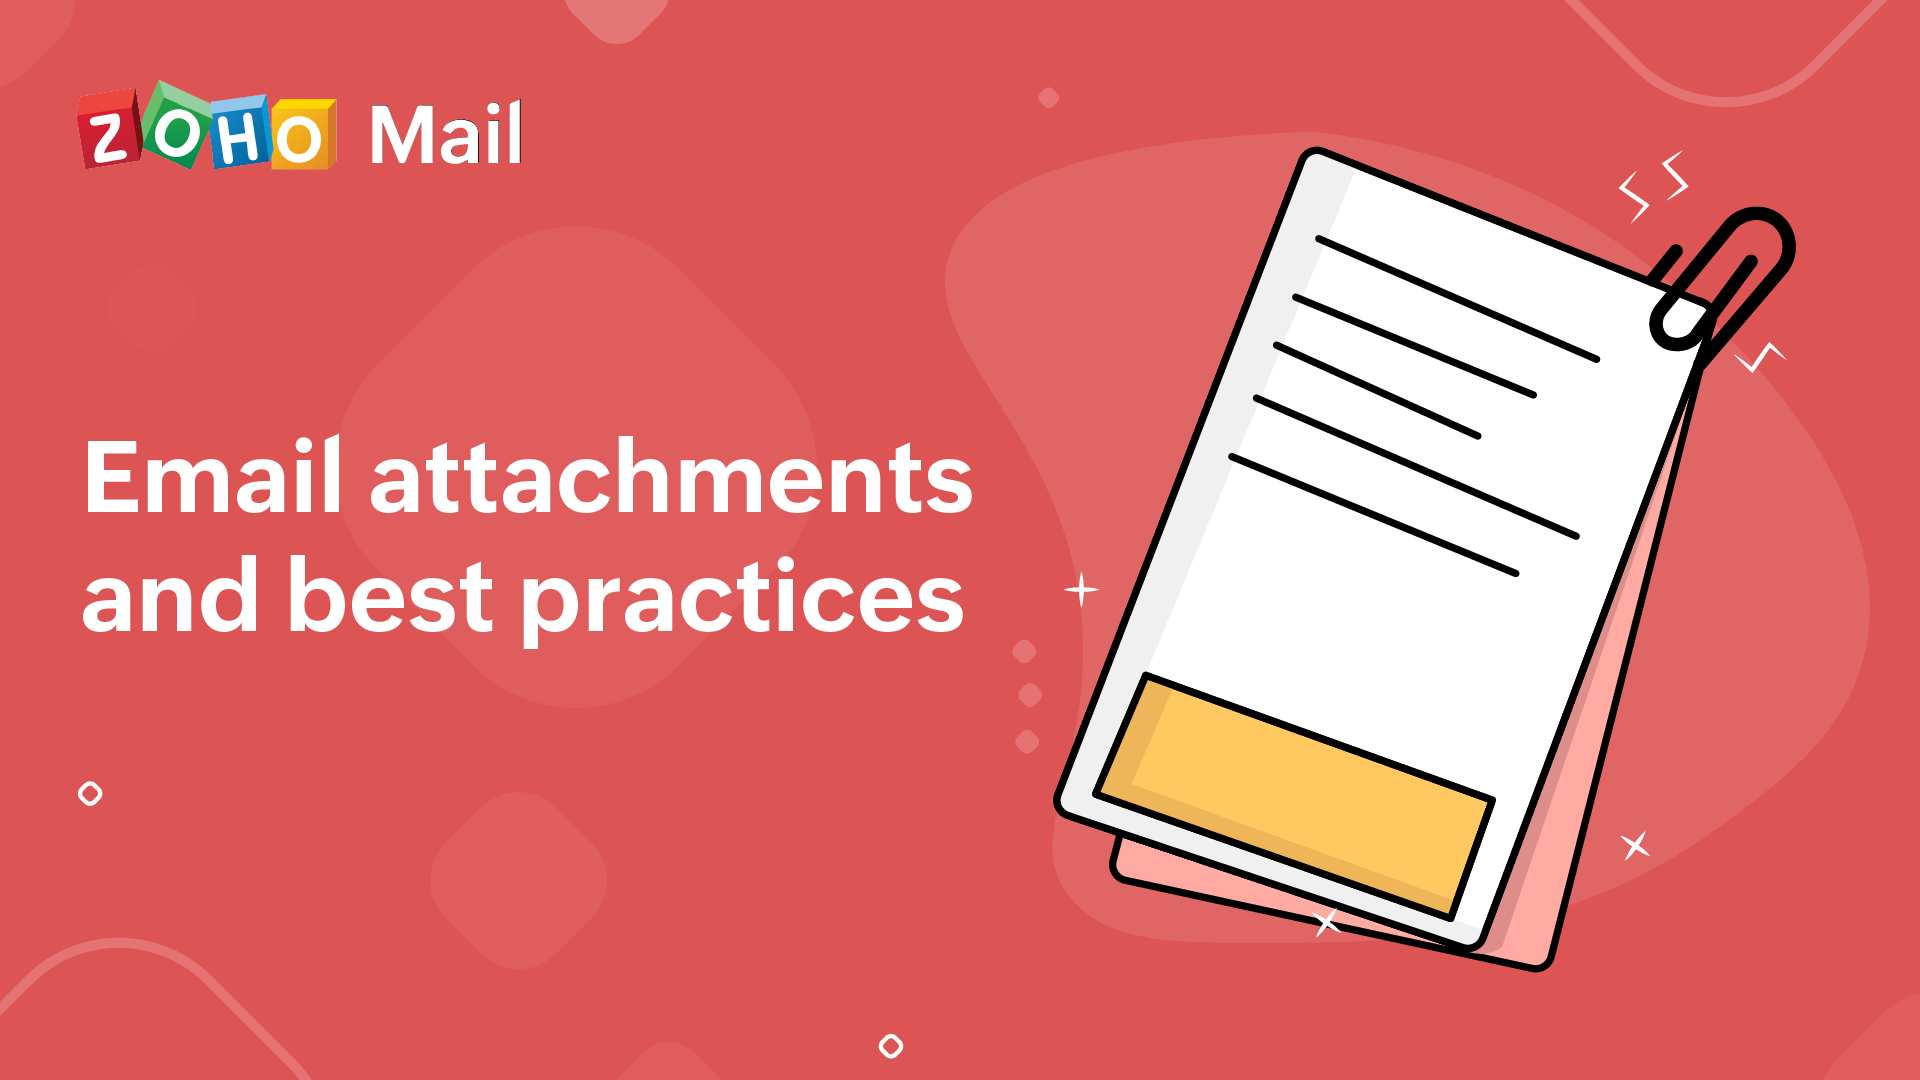 How to send email attachments and best practices 